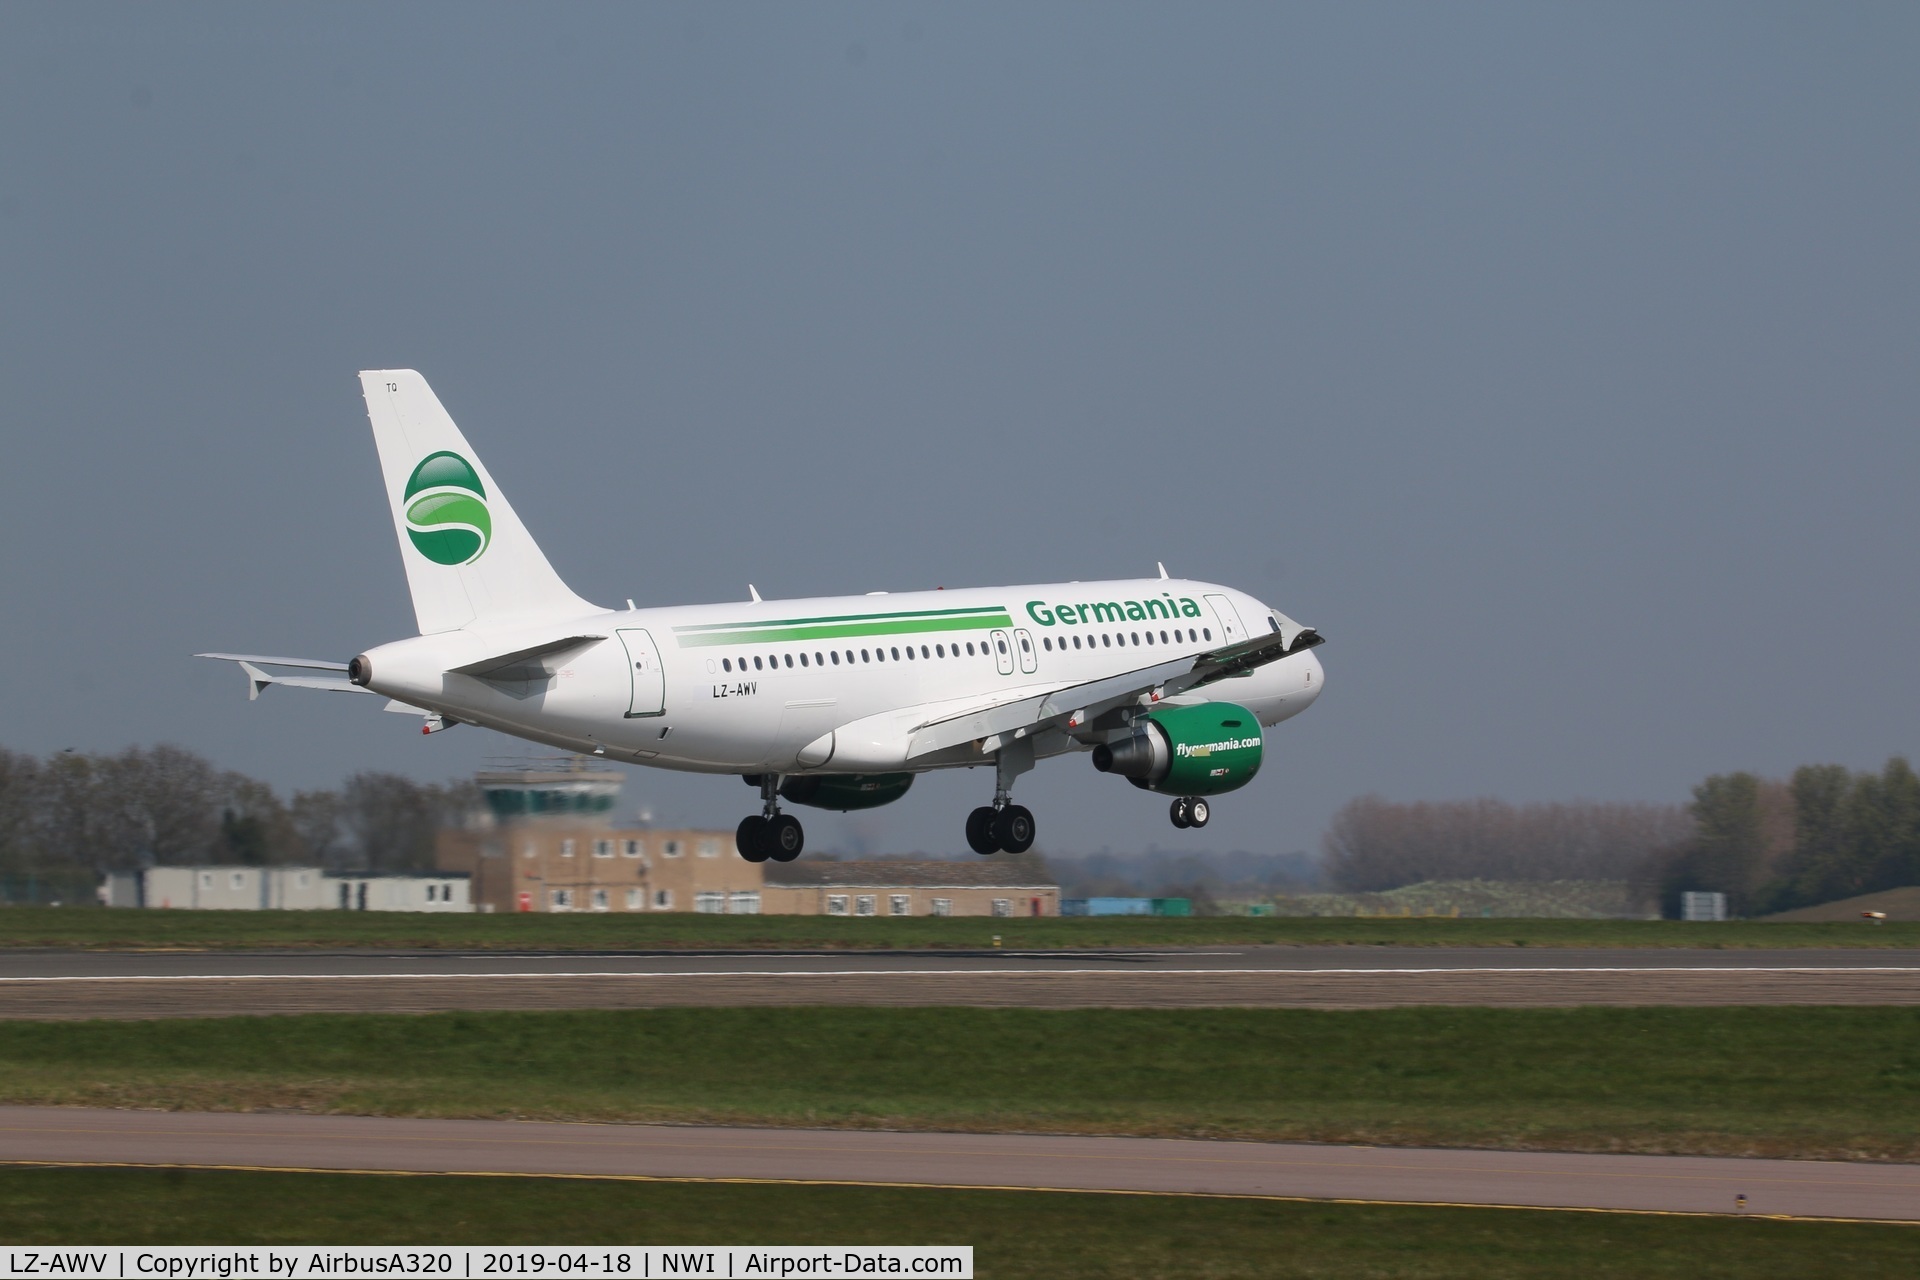 LZ-AWV, 2008 Airbus A319-100 C/N 3403, Landing on Rwy 09 at NWI